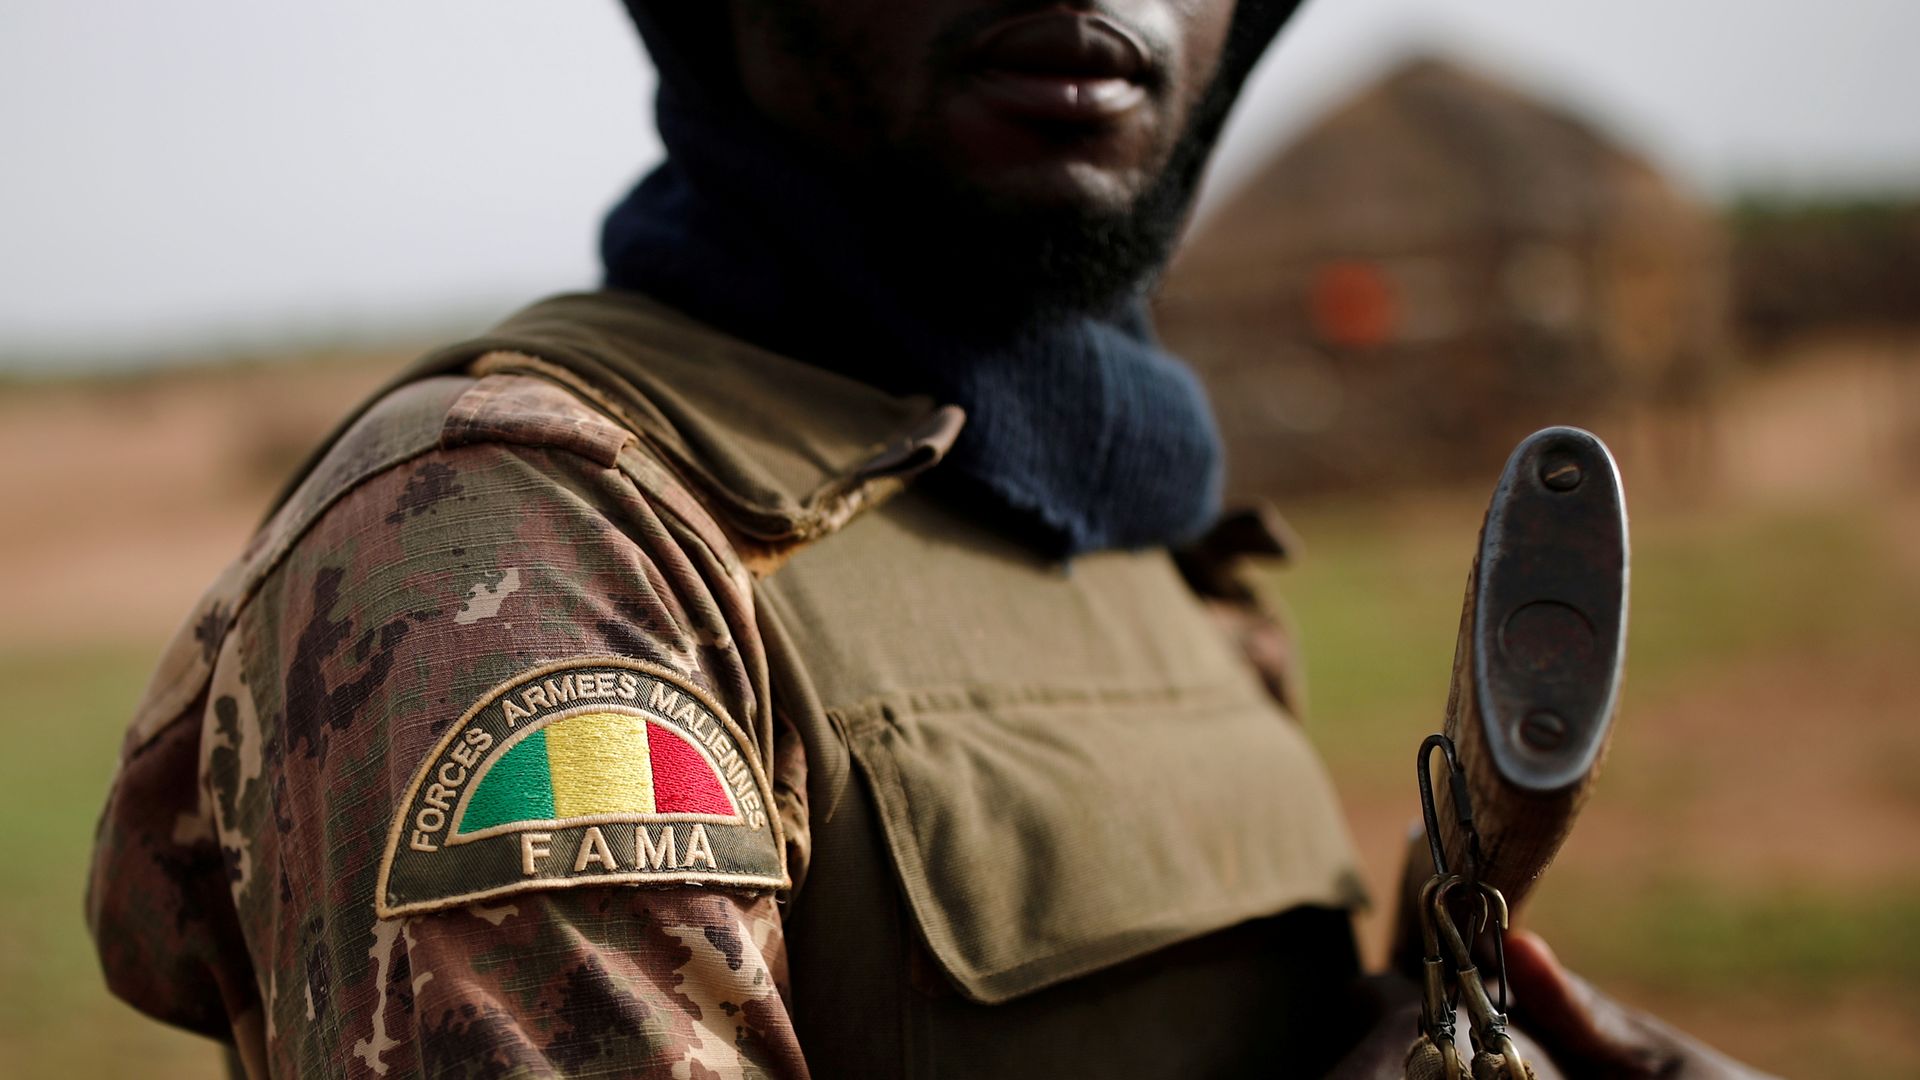 In this image, an armed soldier holds a gun and his sleeve is decorated with a patch that bears the Mali flag